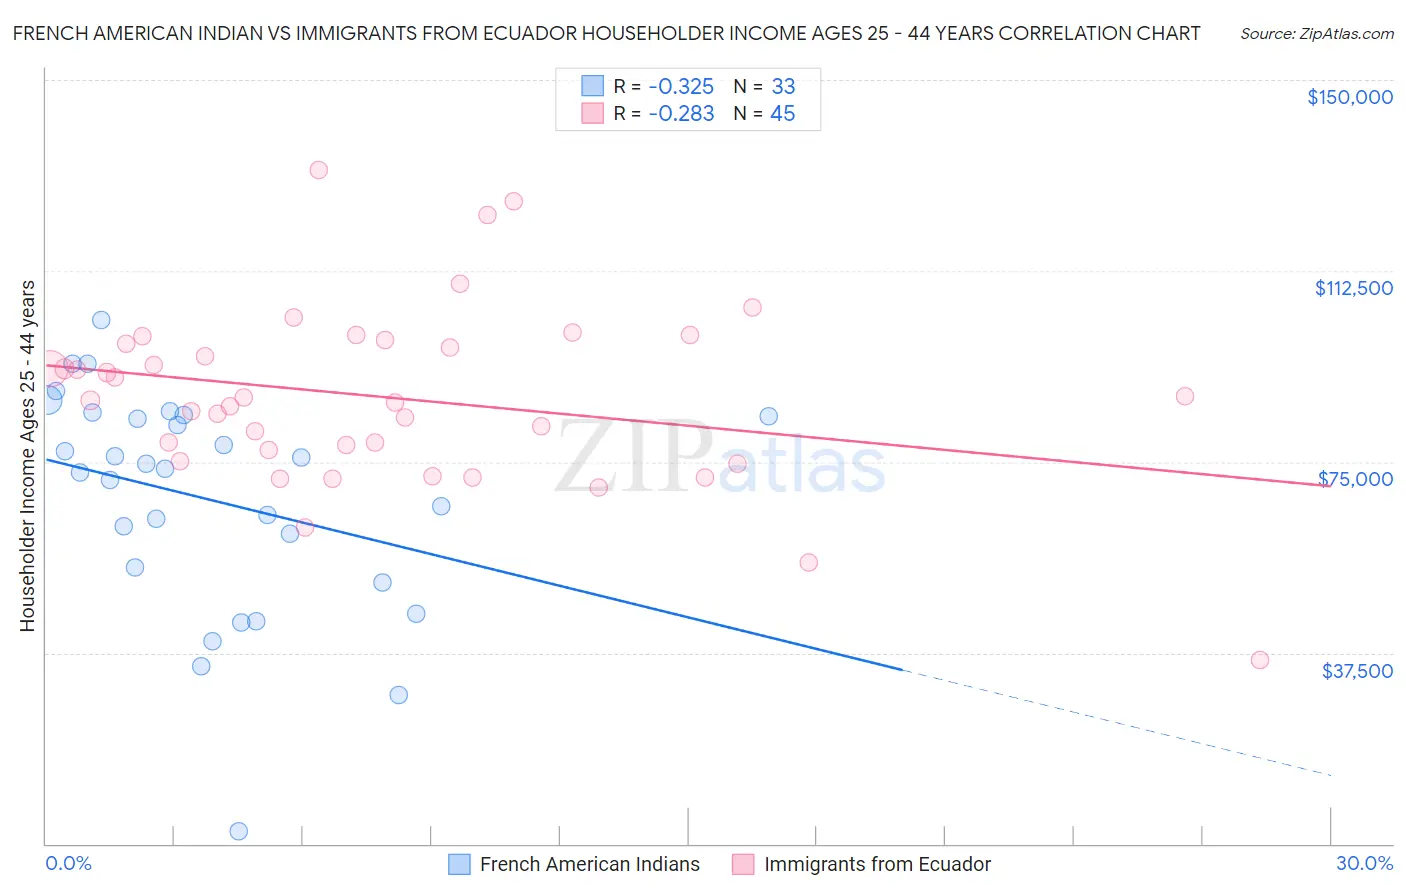 French American Indian vs Immigrants from Ecuador Householder Income Ages 25 - 44 years